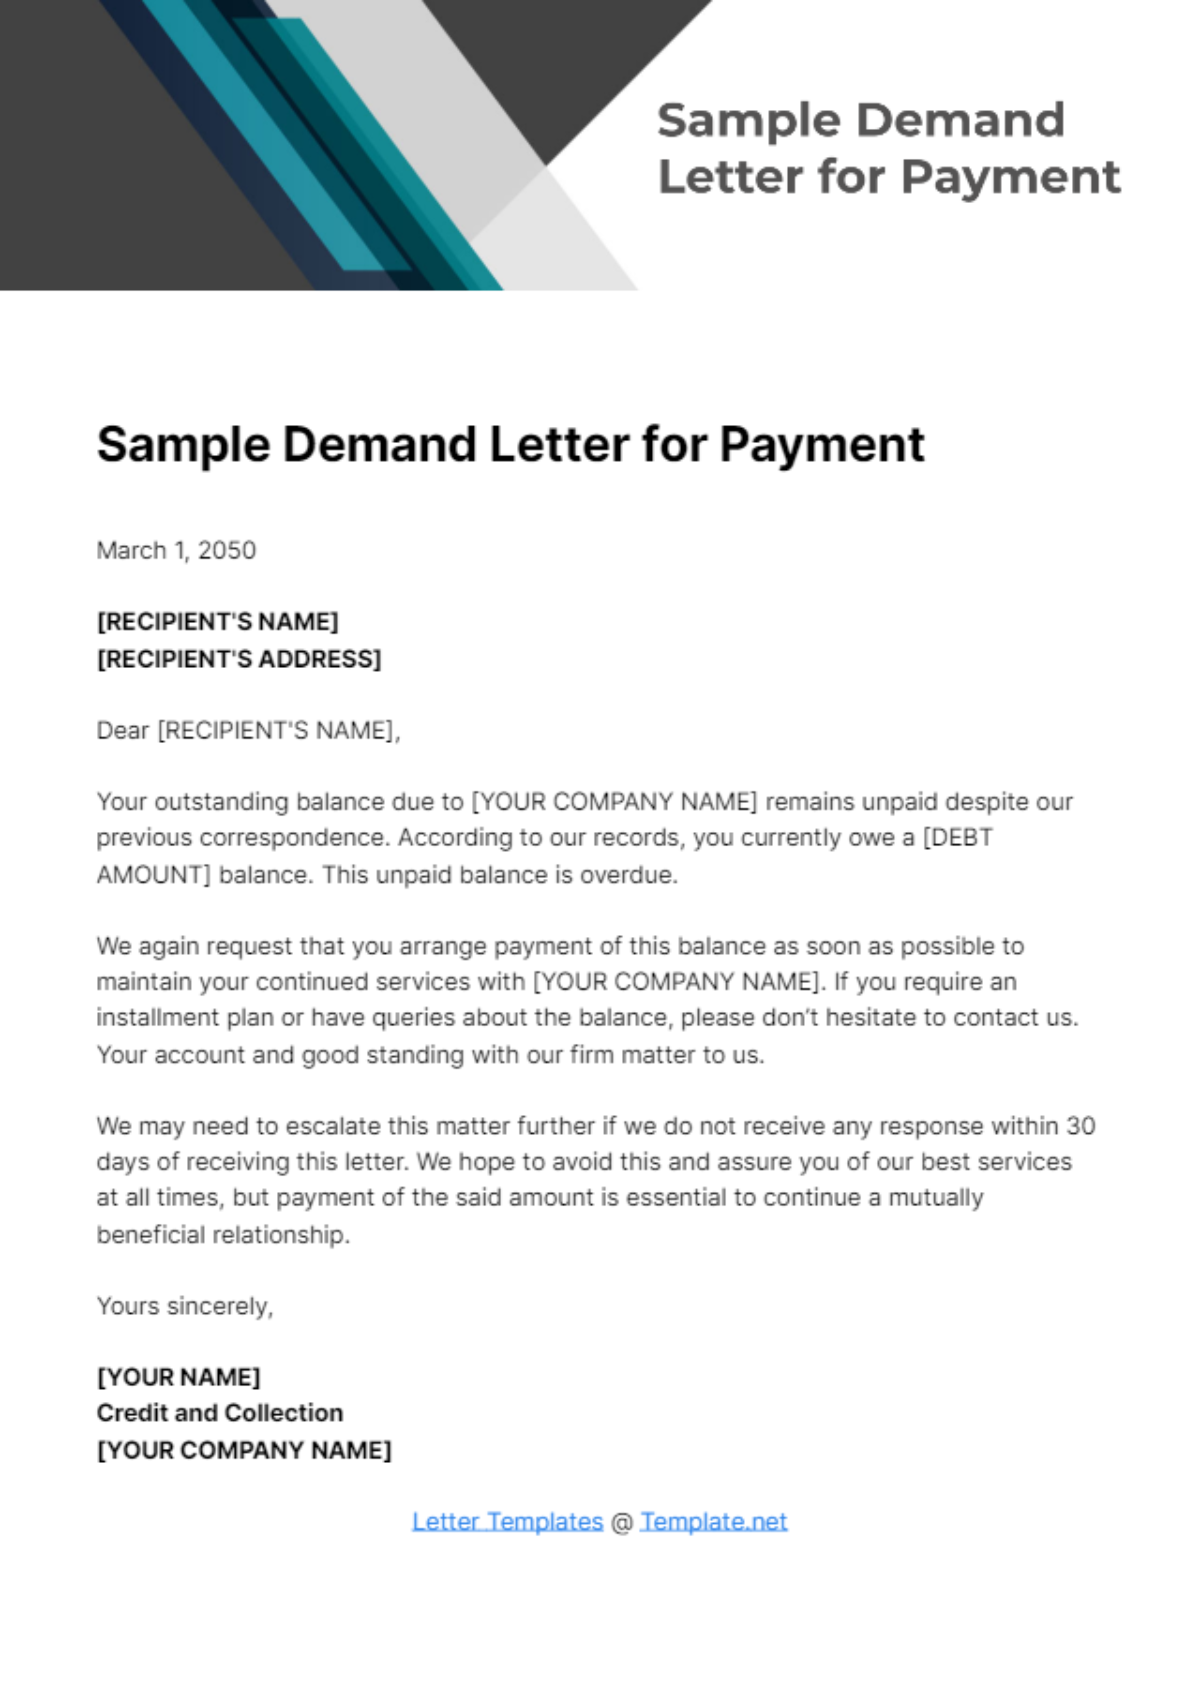 Free Sample Demand Letter for Payment Template